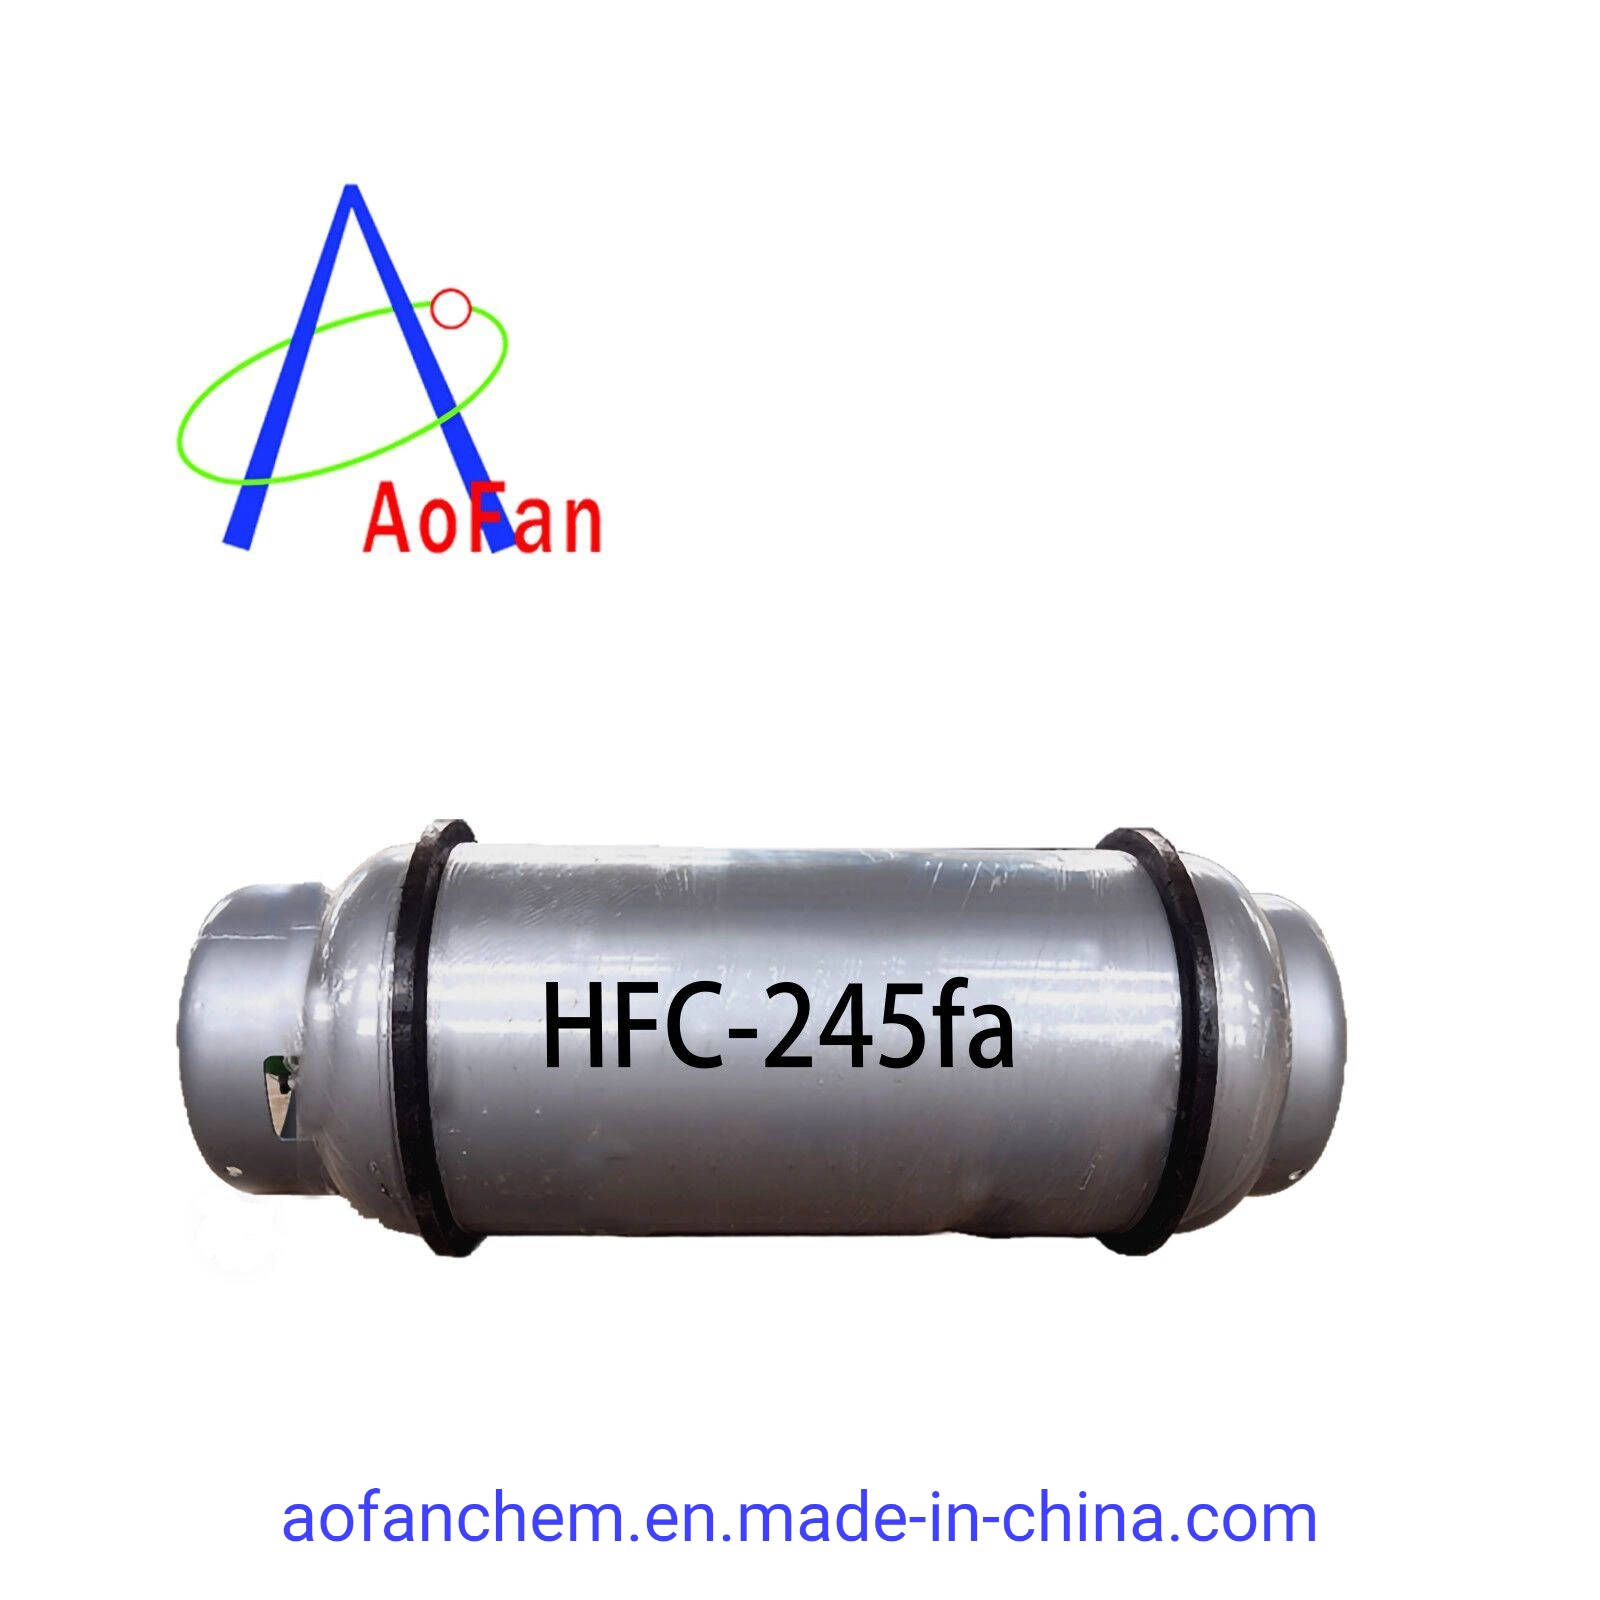 Original Factory Price Fluorine Refrigerant Chinese Manufacturer From China Hfc-245fa